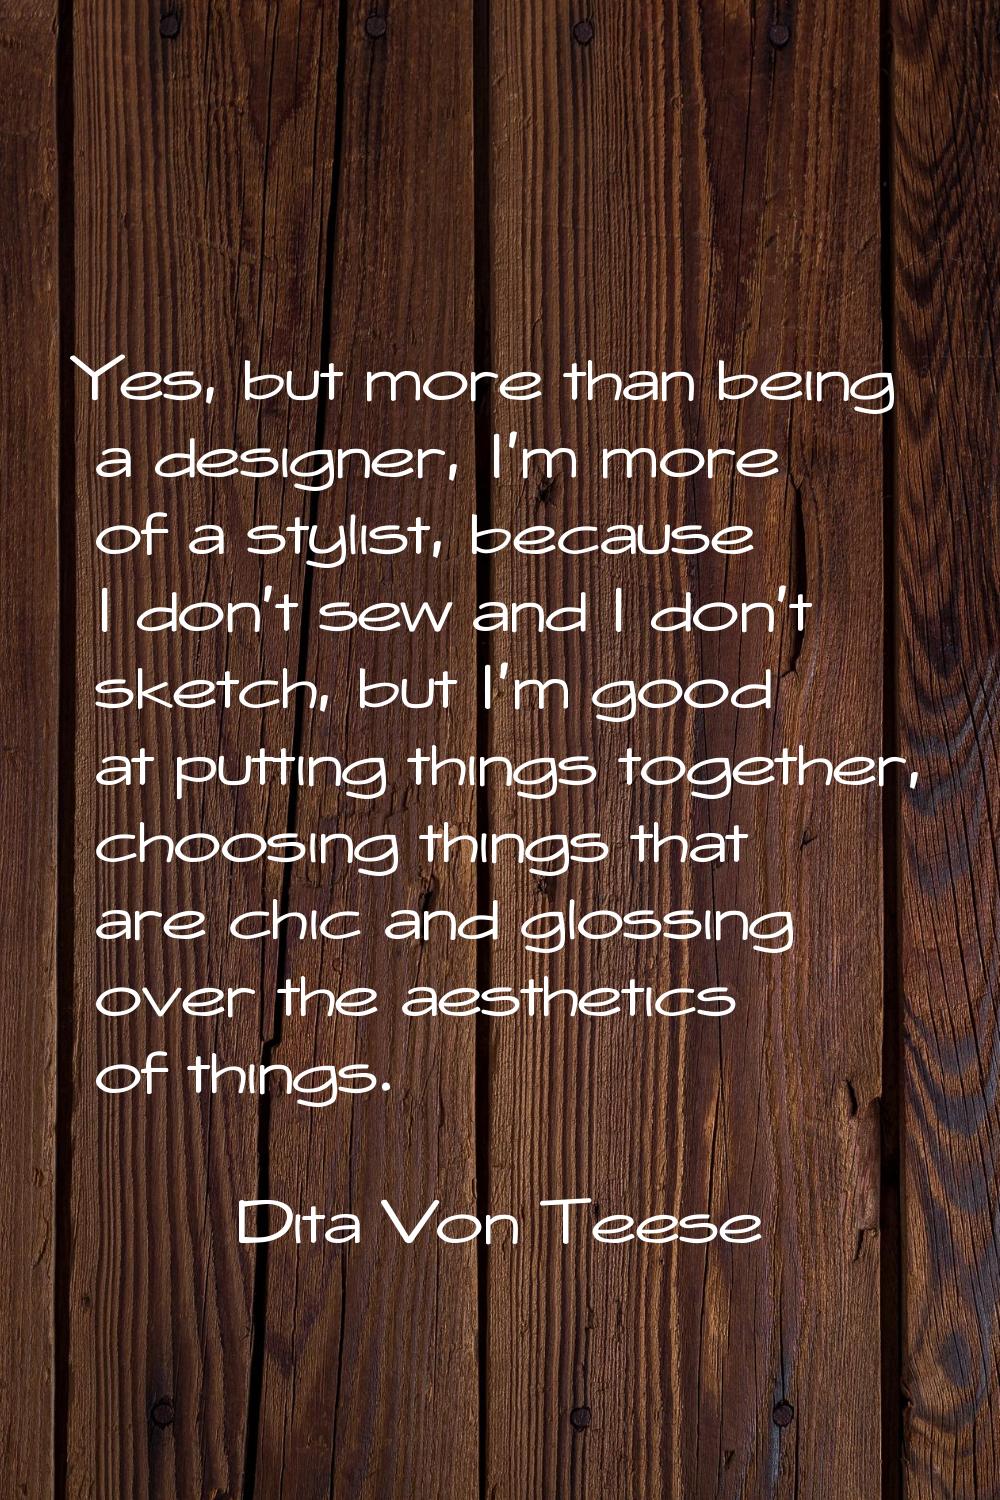 Yes, but more than being a designer, I'm more of a stylist, because I don't sew and I don't sketch,